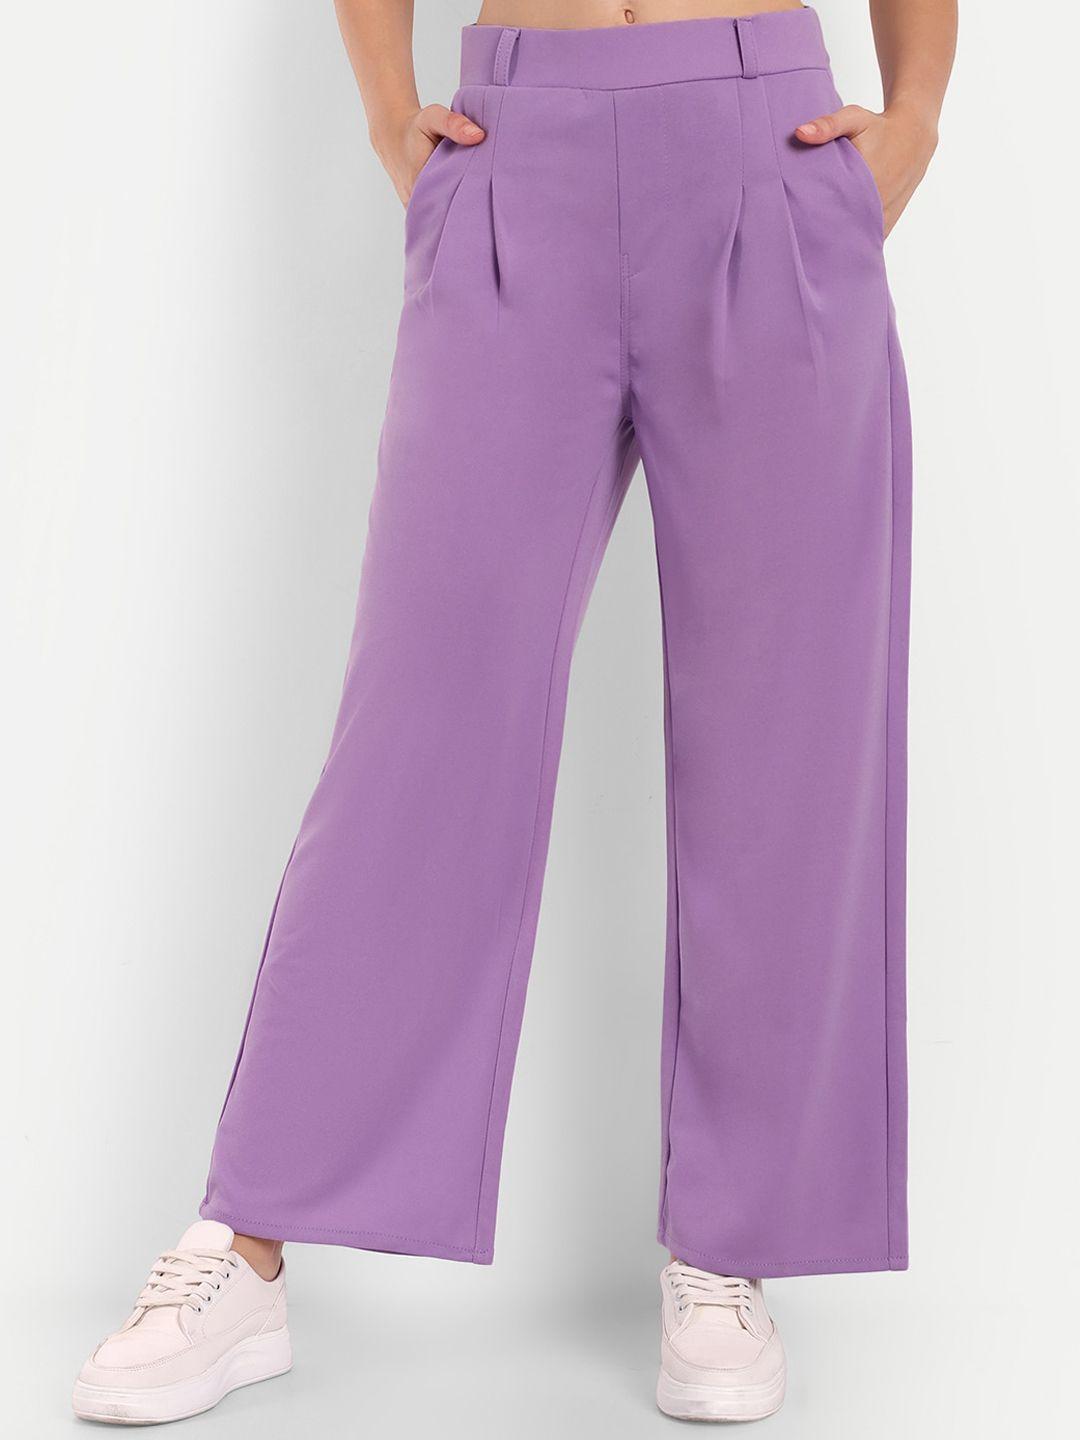 broadstar-women-smart-loose-fit-high-rise-easy-wash-pleated-parallel-trousers